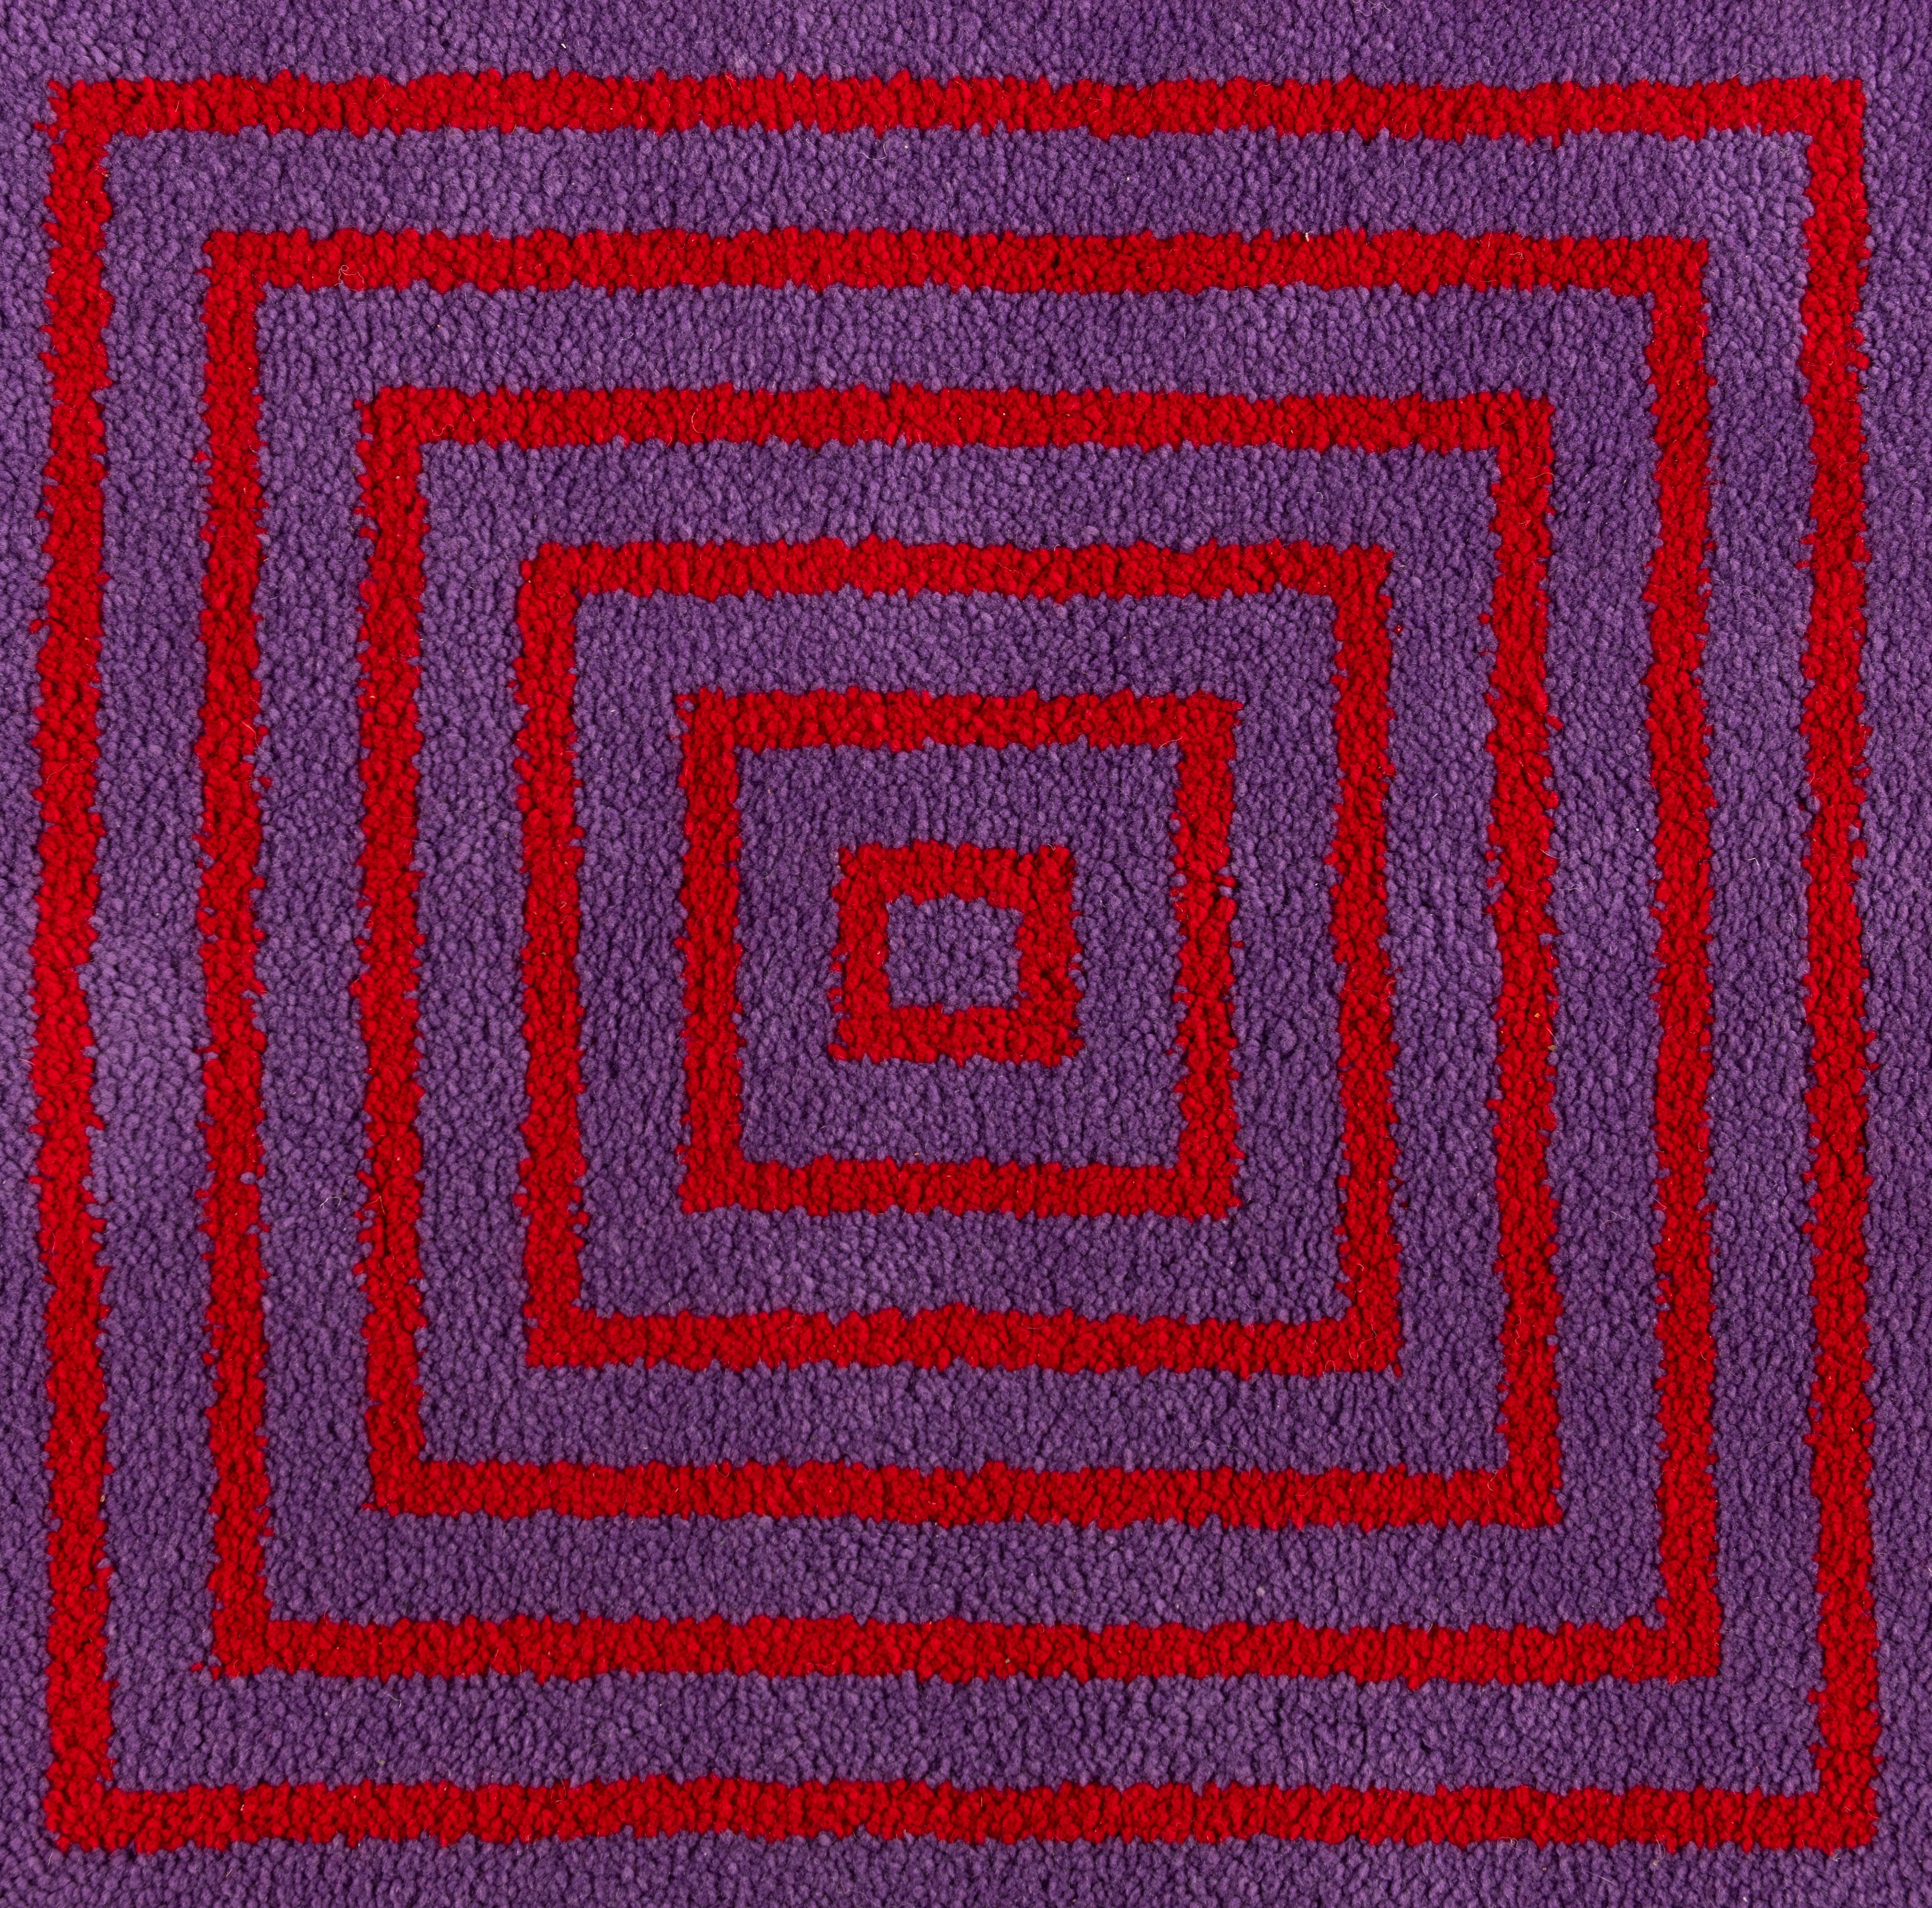 French Victor Vasarely Tapestry/Rug, 1970's Edition 9/50